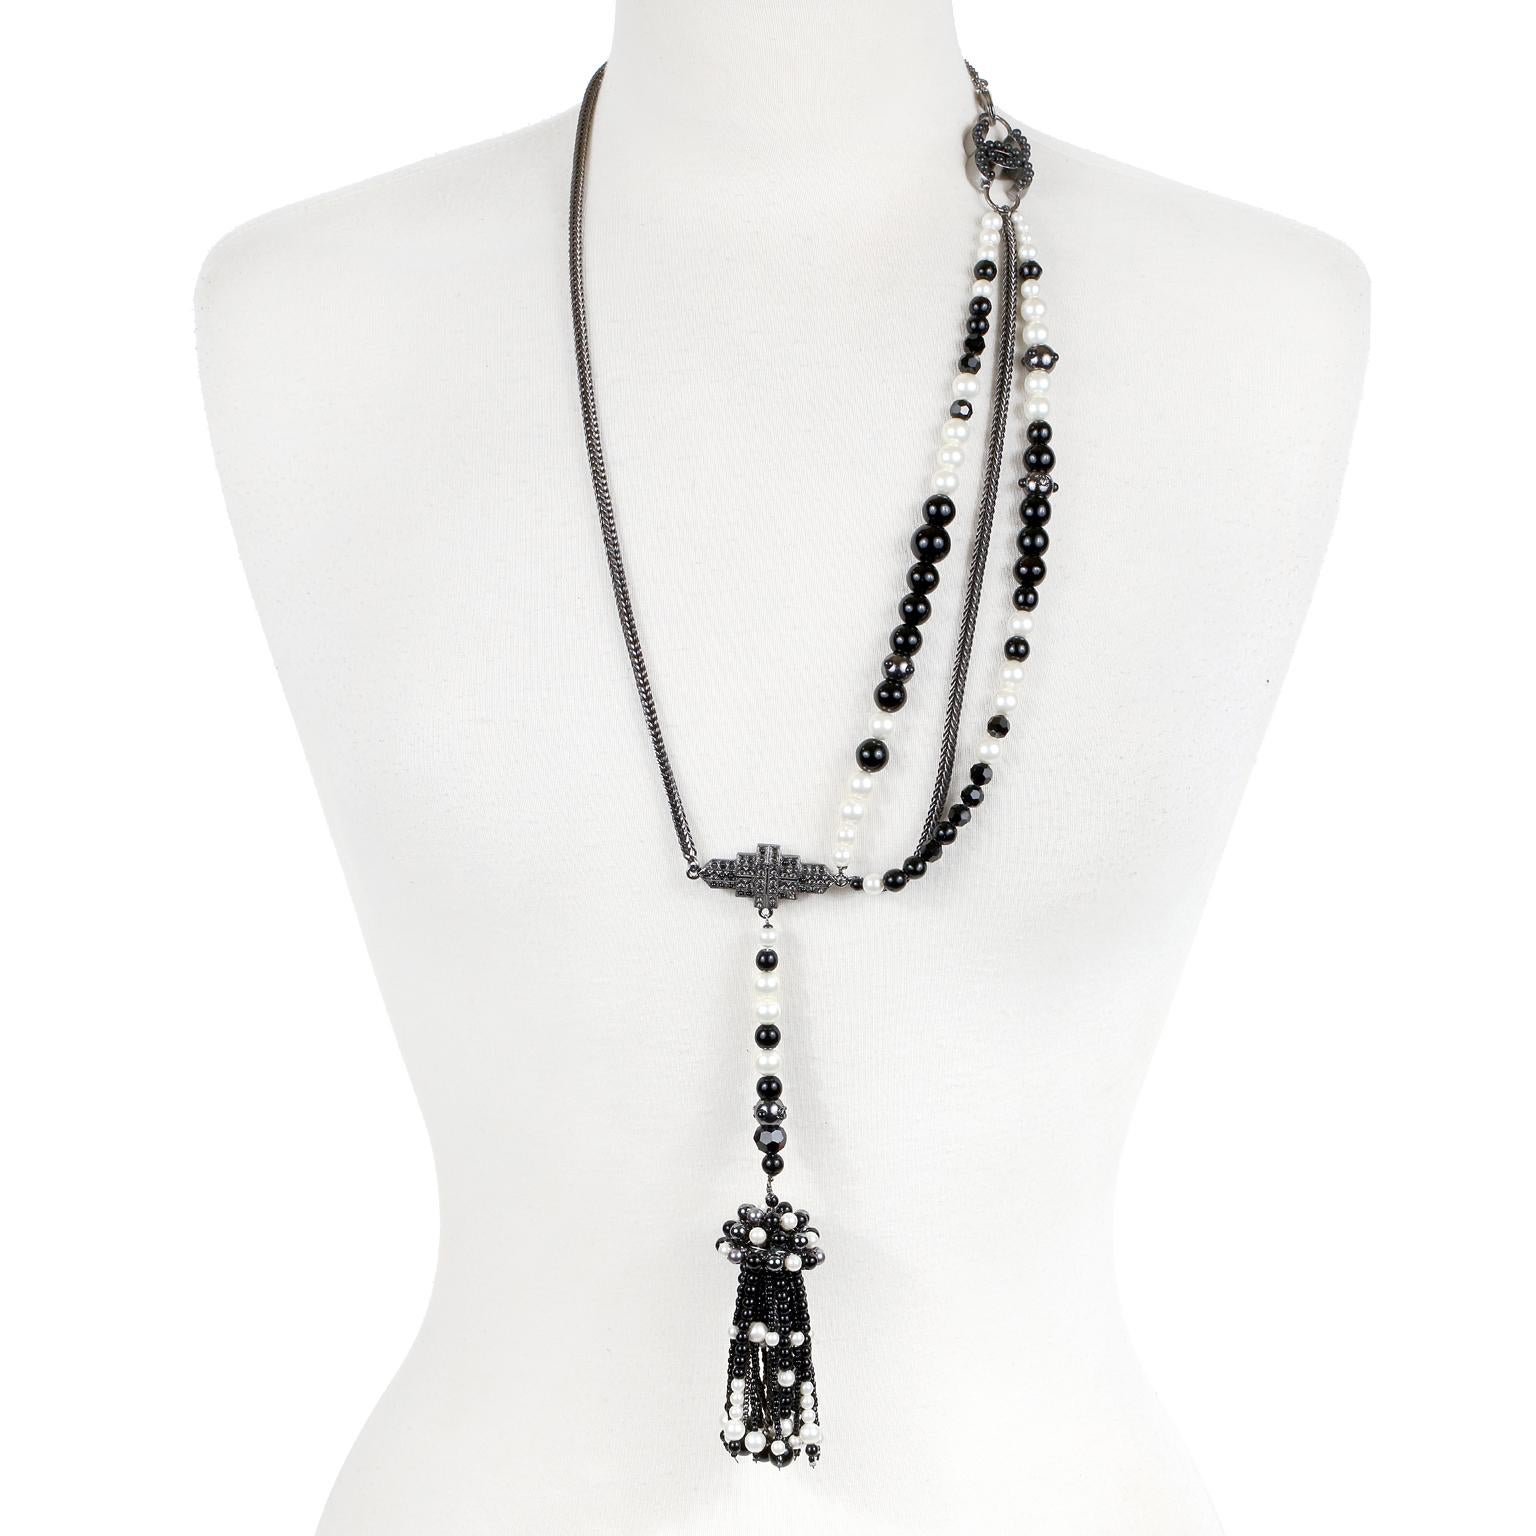 This authentic Chanel Black and White Pearl Tassel Belt is in excellent condition from the 2002 collection.  Black and white beads and pearls combine with dark silver tone metal chain.  Large beaded tassel dangles from an art deco inspired ornament.